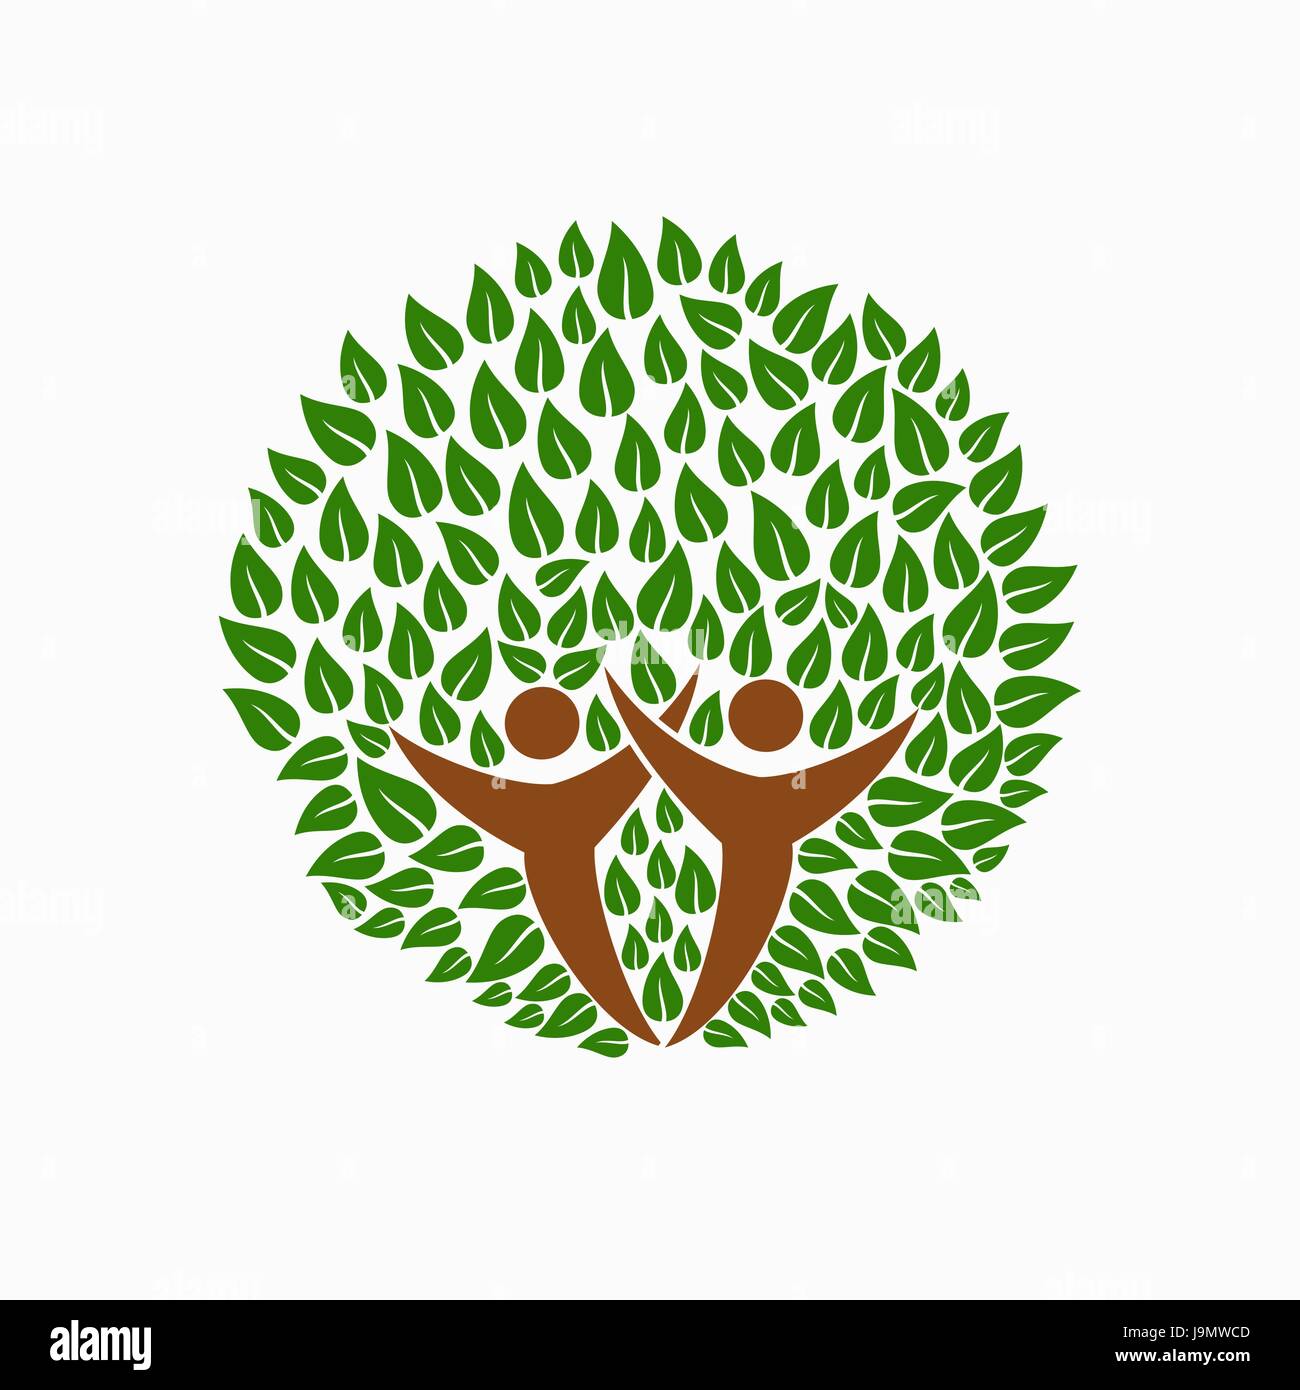 Green tree symbol with people silhouettes. Concept illustration for community environment help. EPS10 vector. Stock Vector